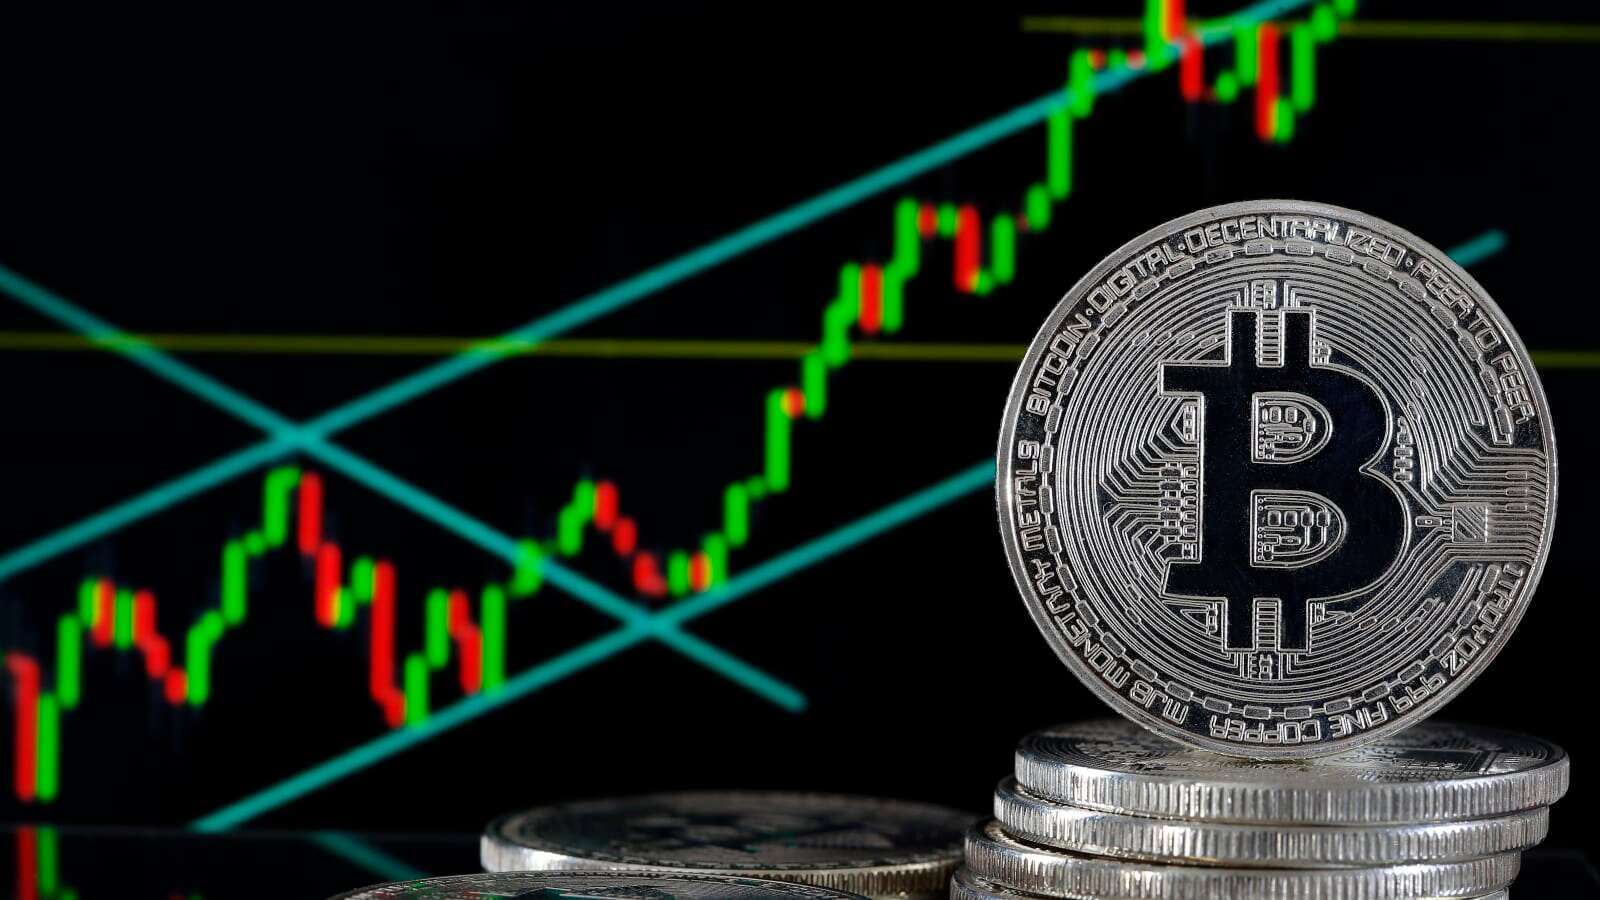 Picture of a bitcoin in front of a red and green candlestick chart